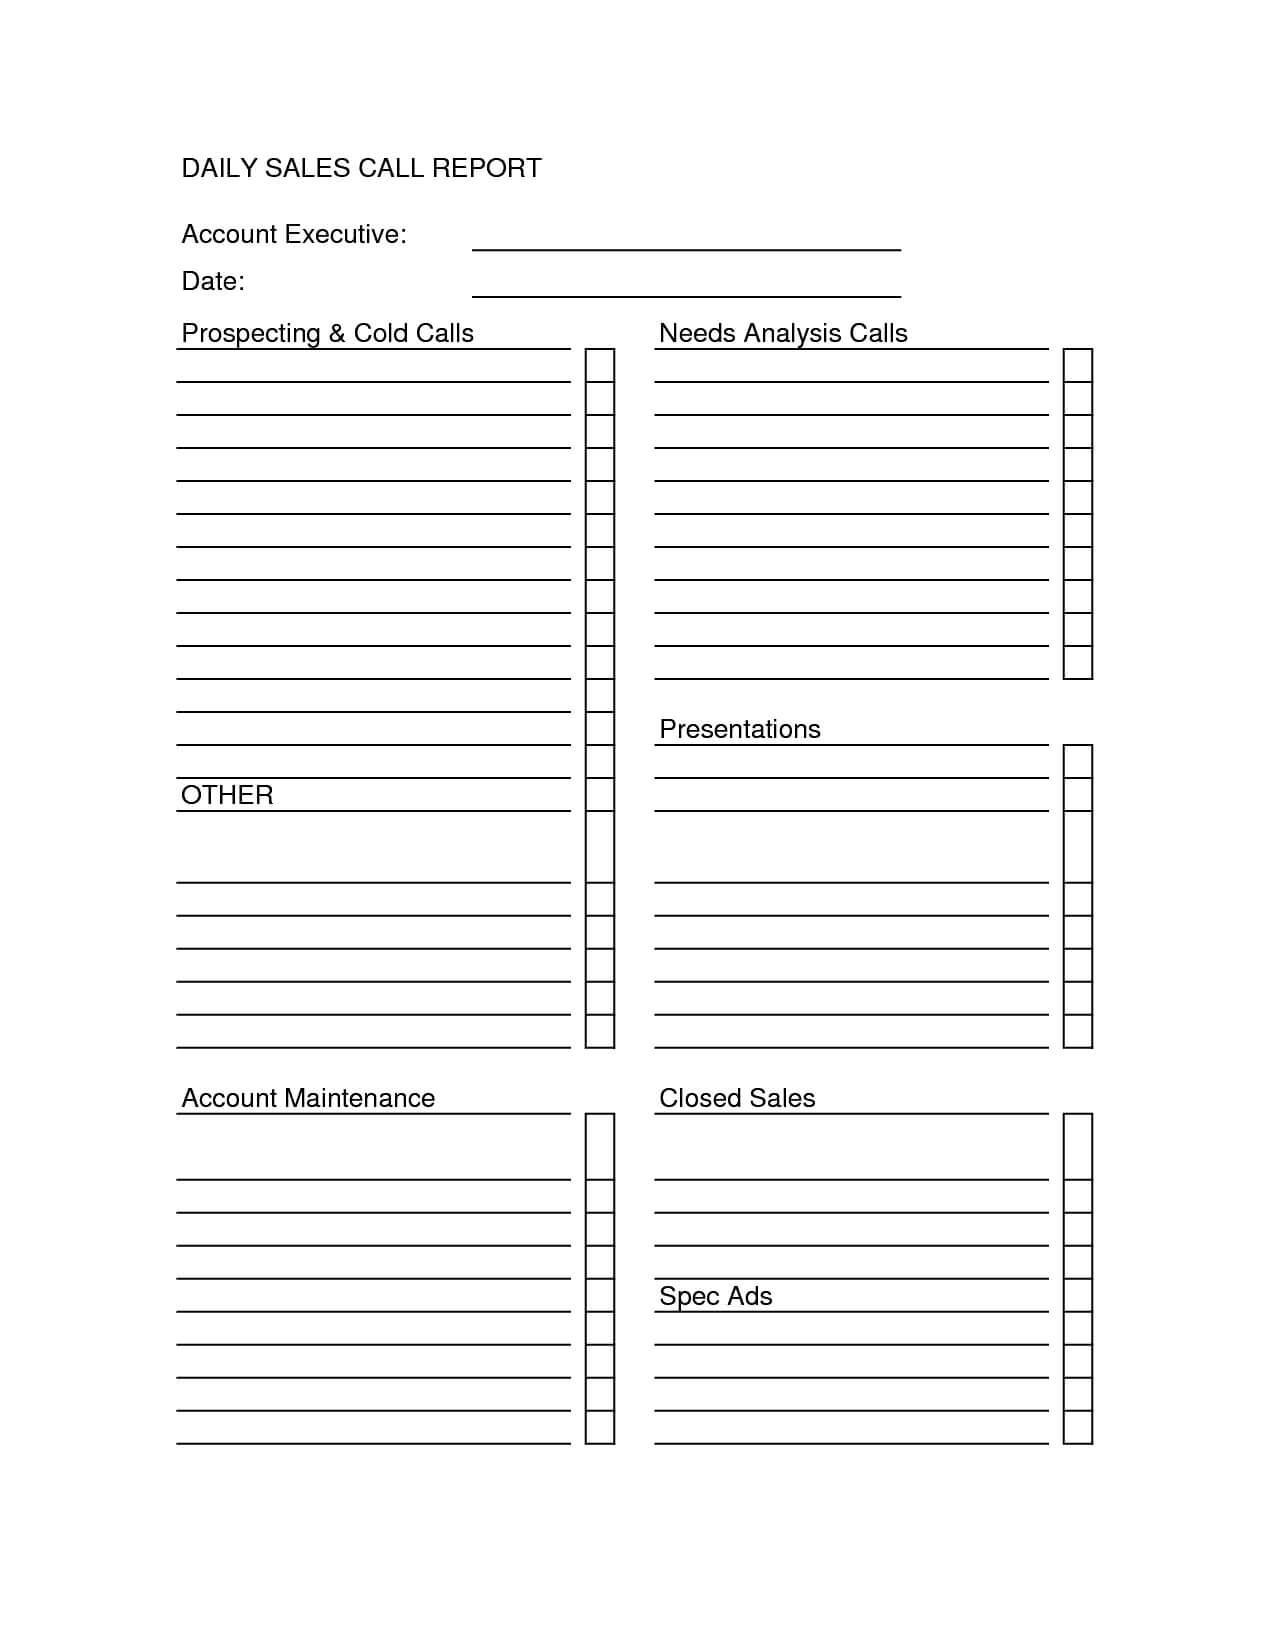 Sales Call Report Templates - Word Excel Fomats Within Sales Call Report Template